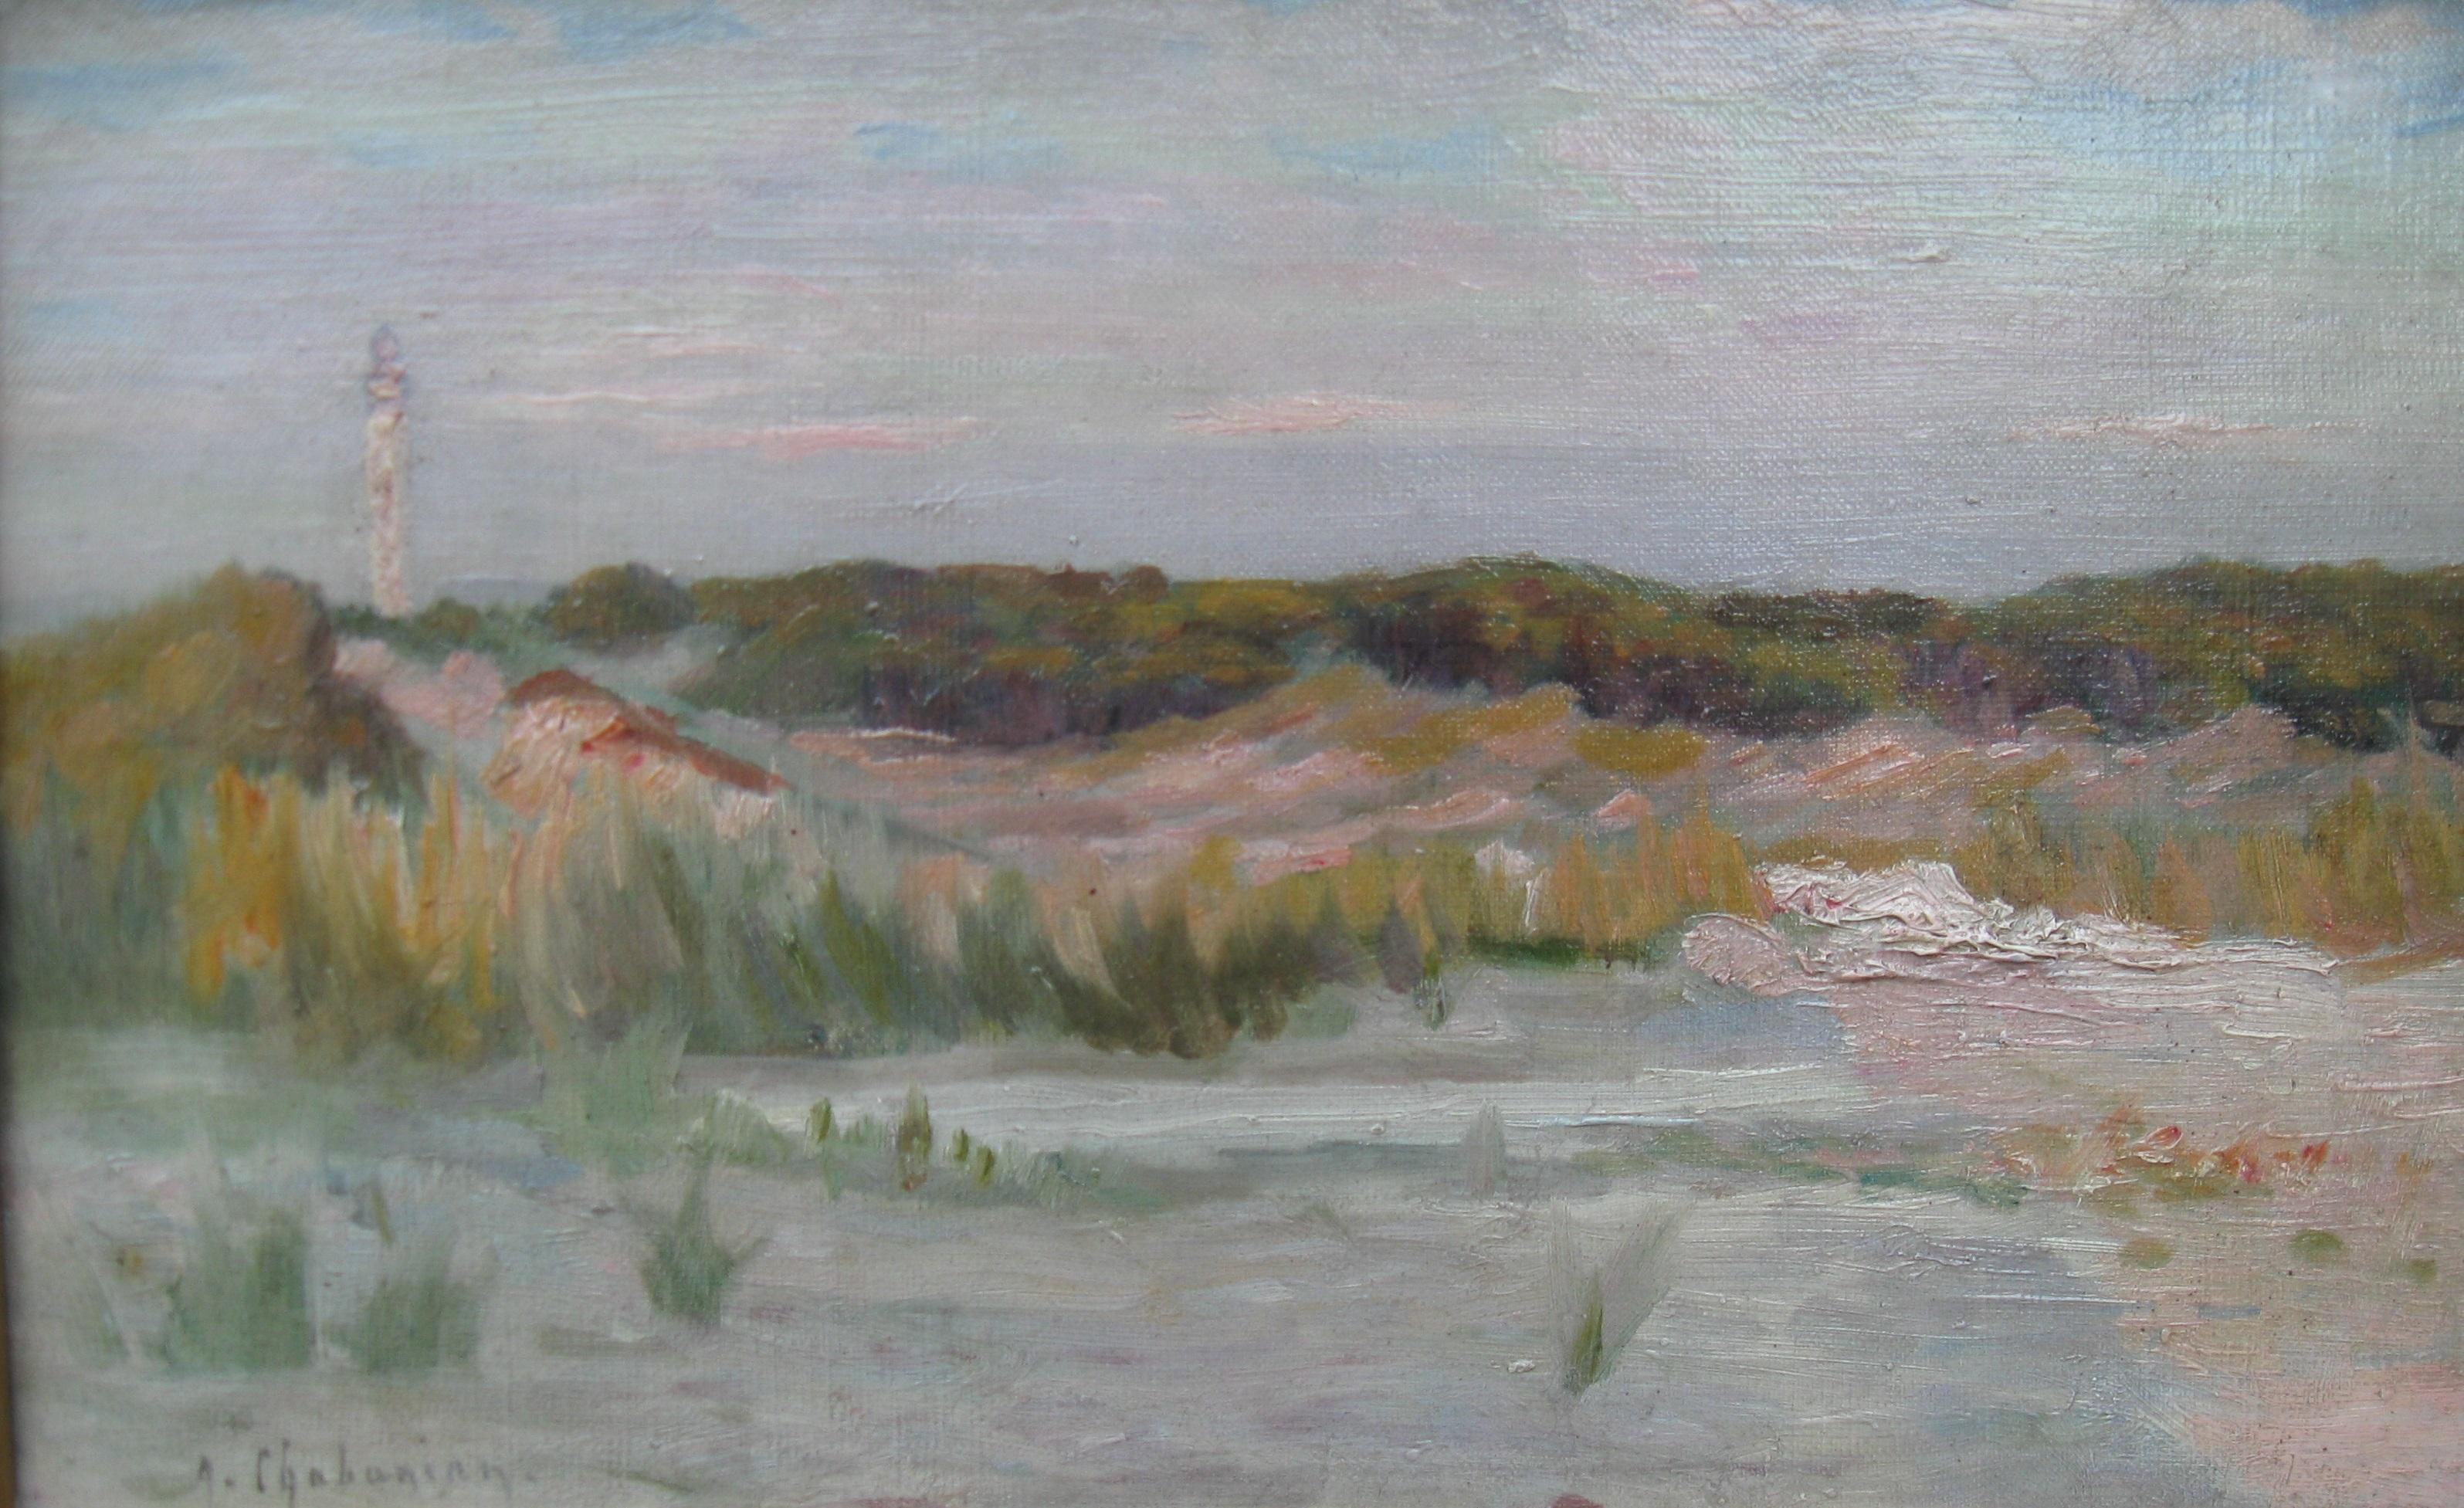 Arsene Chabanian Landscape Painting - 'Dunes of Normandy, France' oil on canvas circa 1920